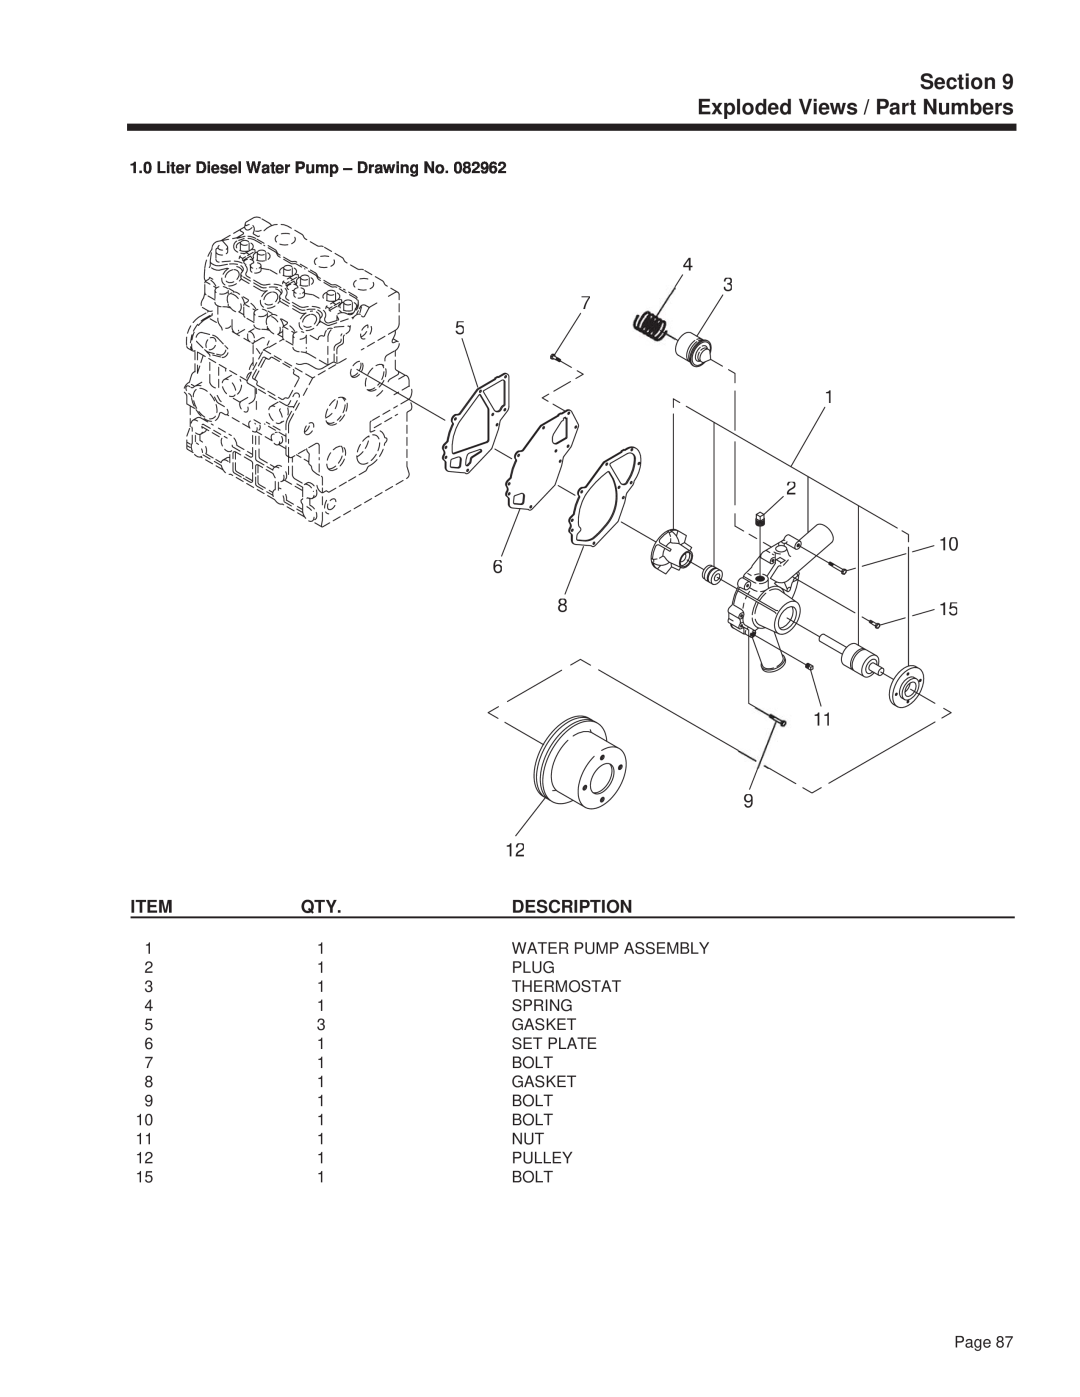 Guardian Technologies 4270 Section Exploded Views / Part Numbers, Liter Diesel Water Pump - Drawing No, Plug, Thermostat 